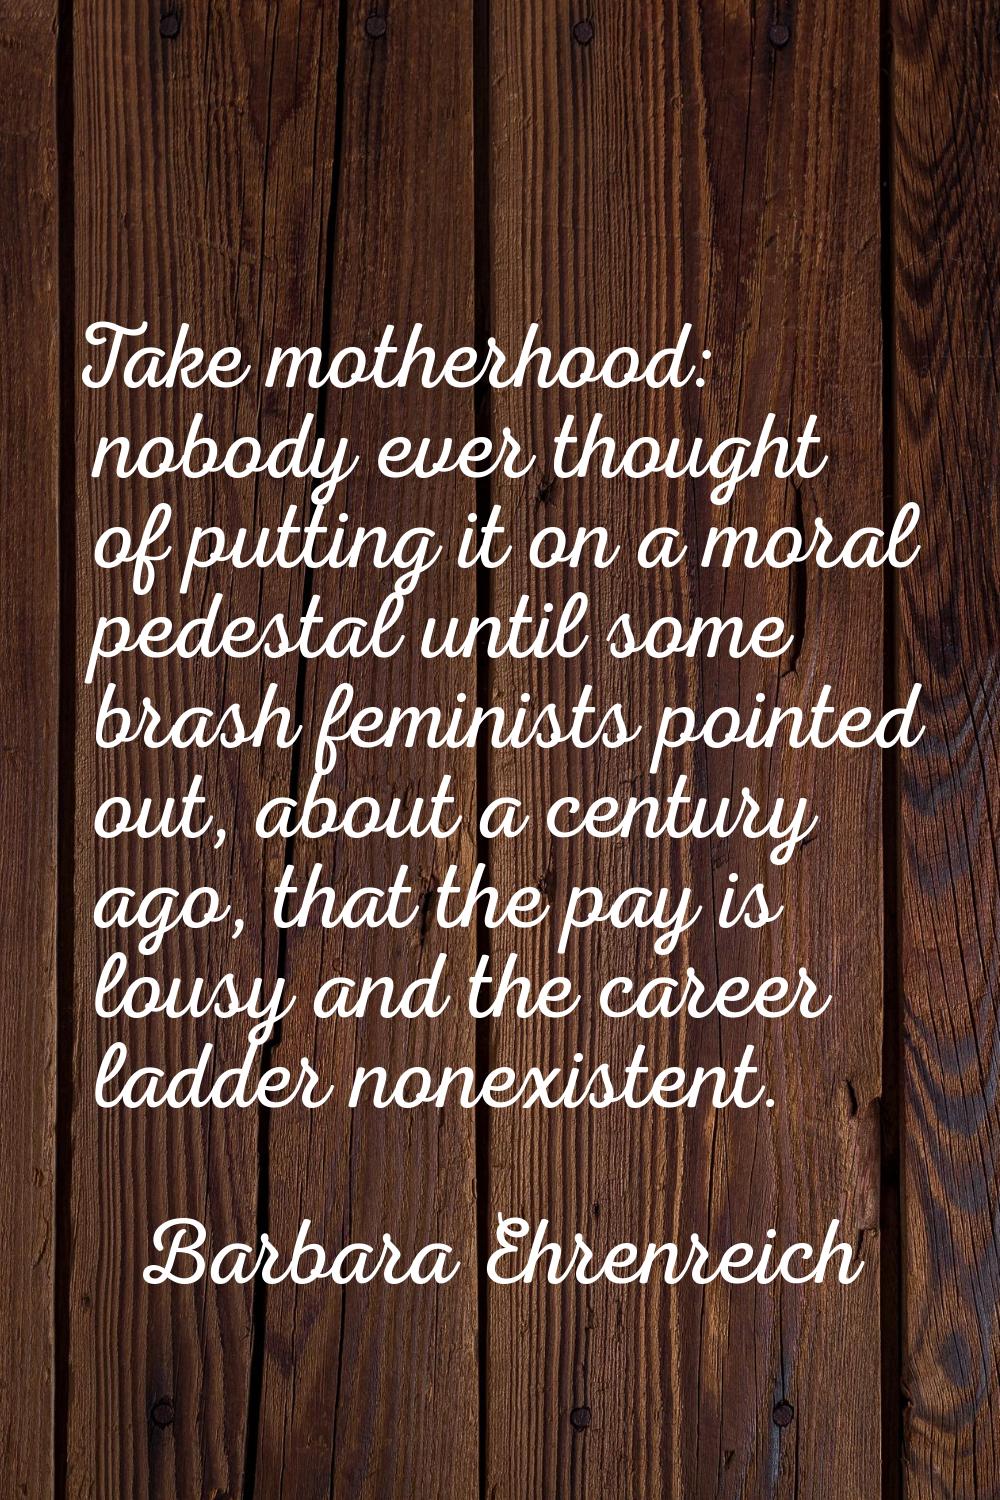 Take motherhood: nobody ever thought of putting it on a moral pedestal until some brash feminists p